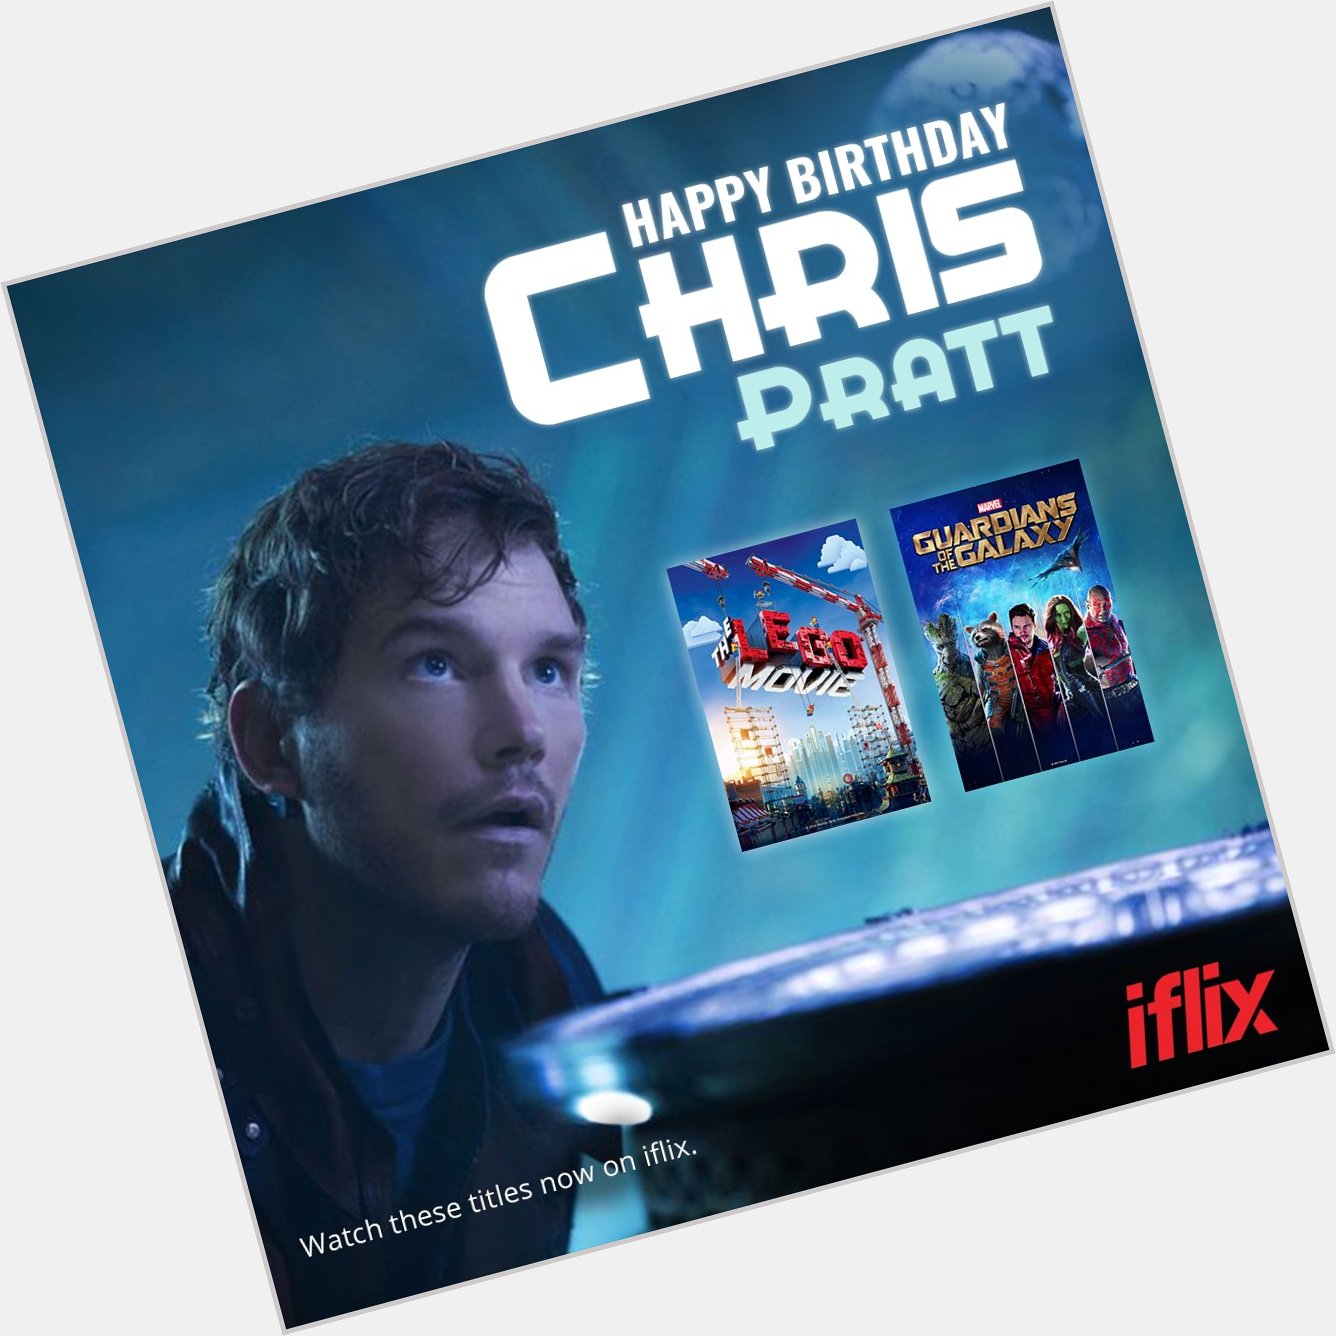 Whether as an Avenger or a brick, he surely has his charms. 

Happy birthday, Chris Pratt!   